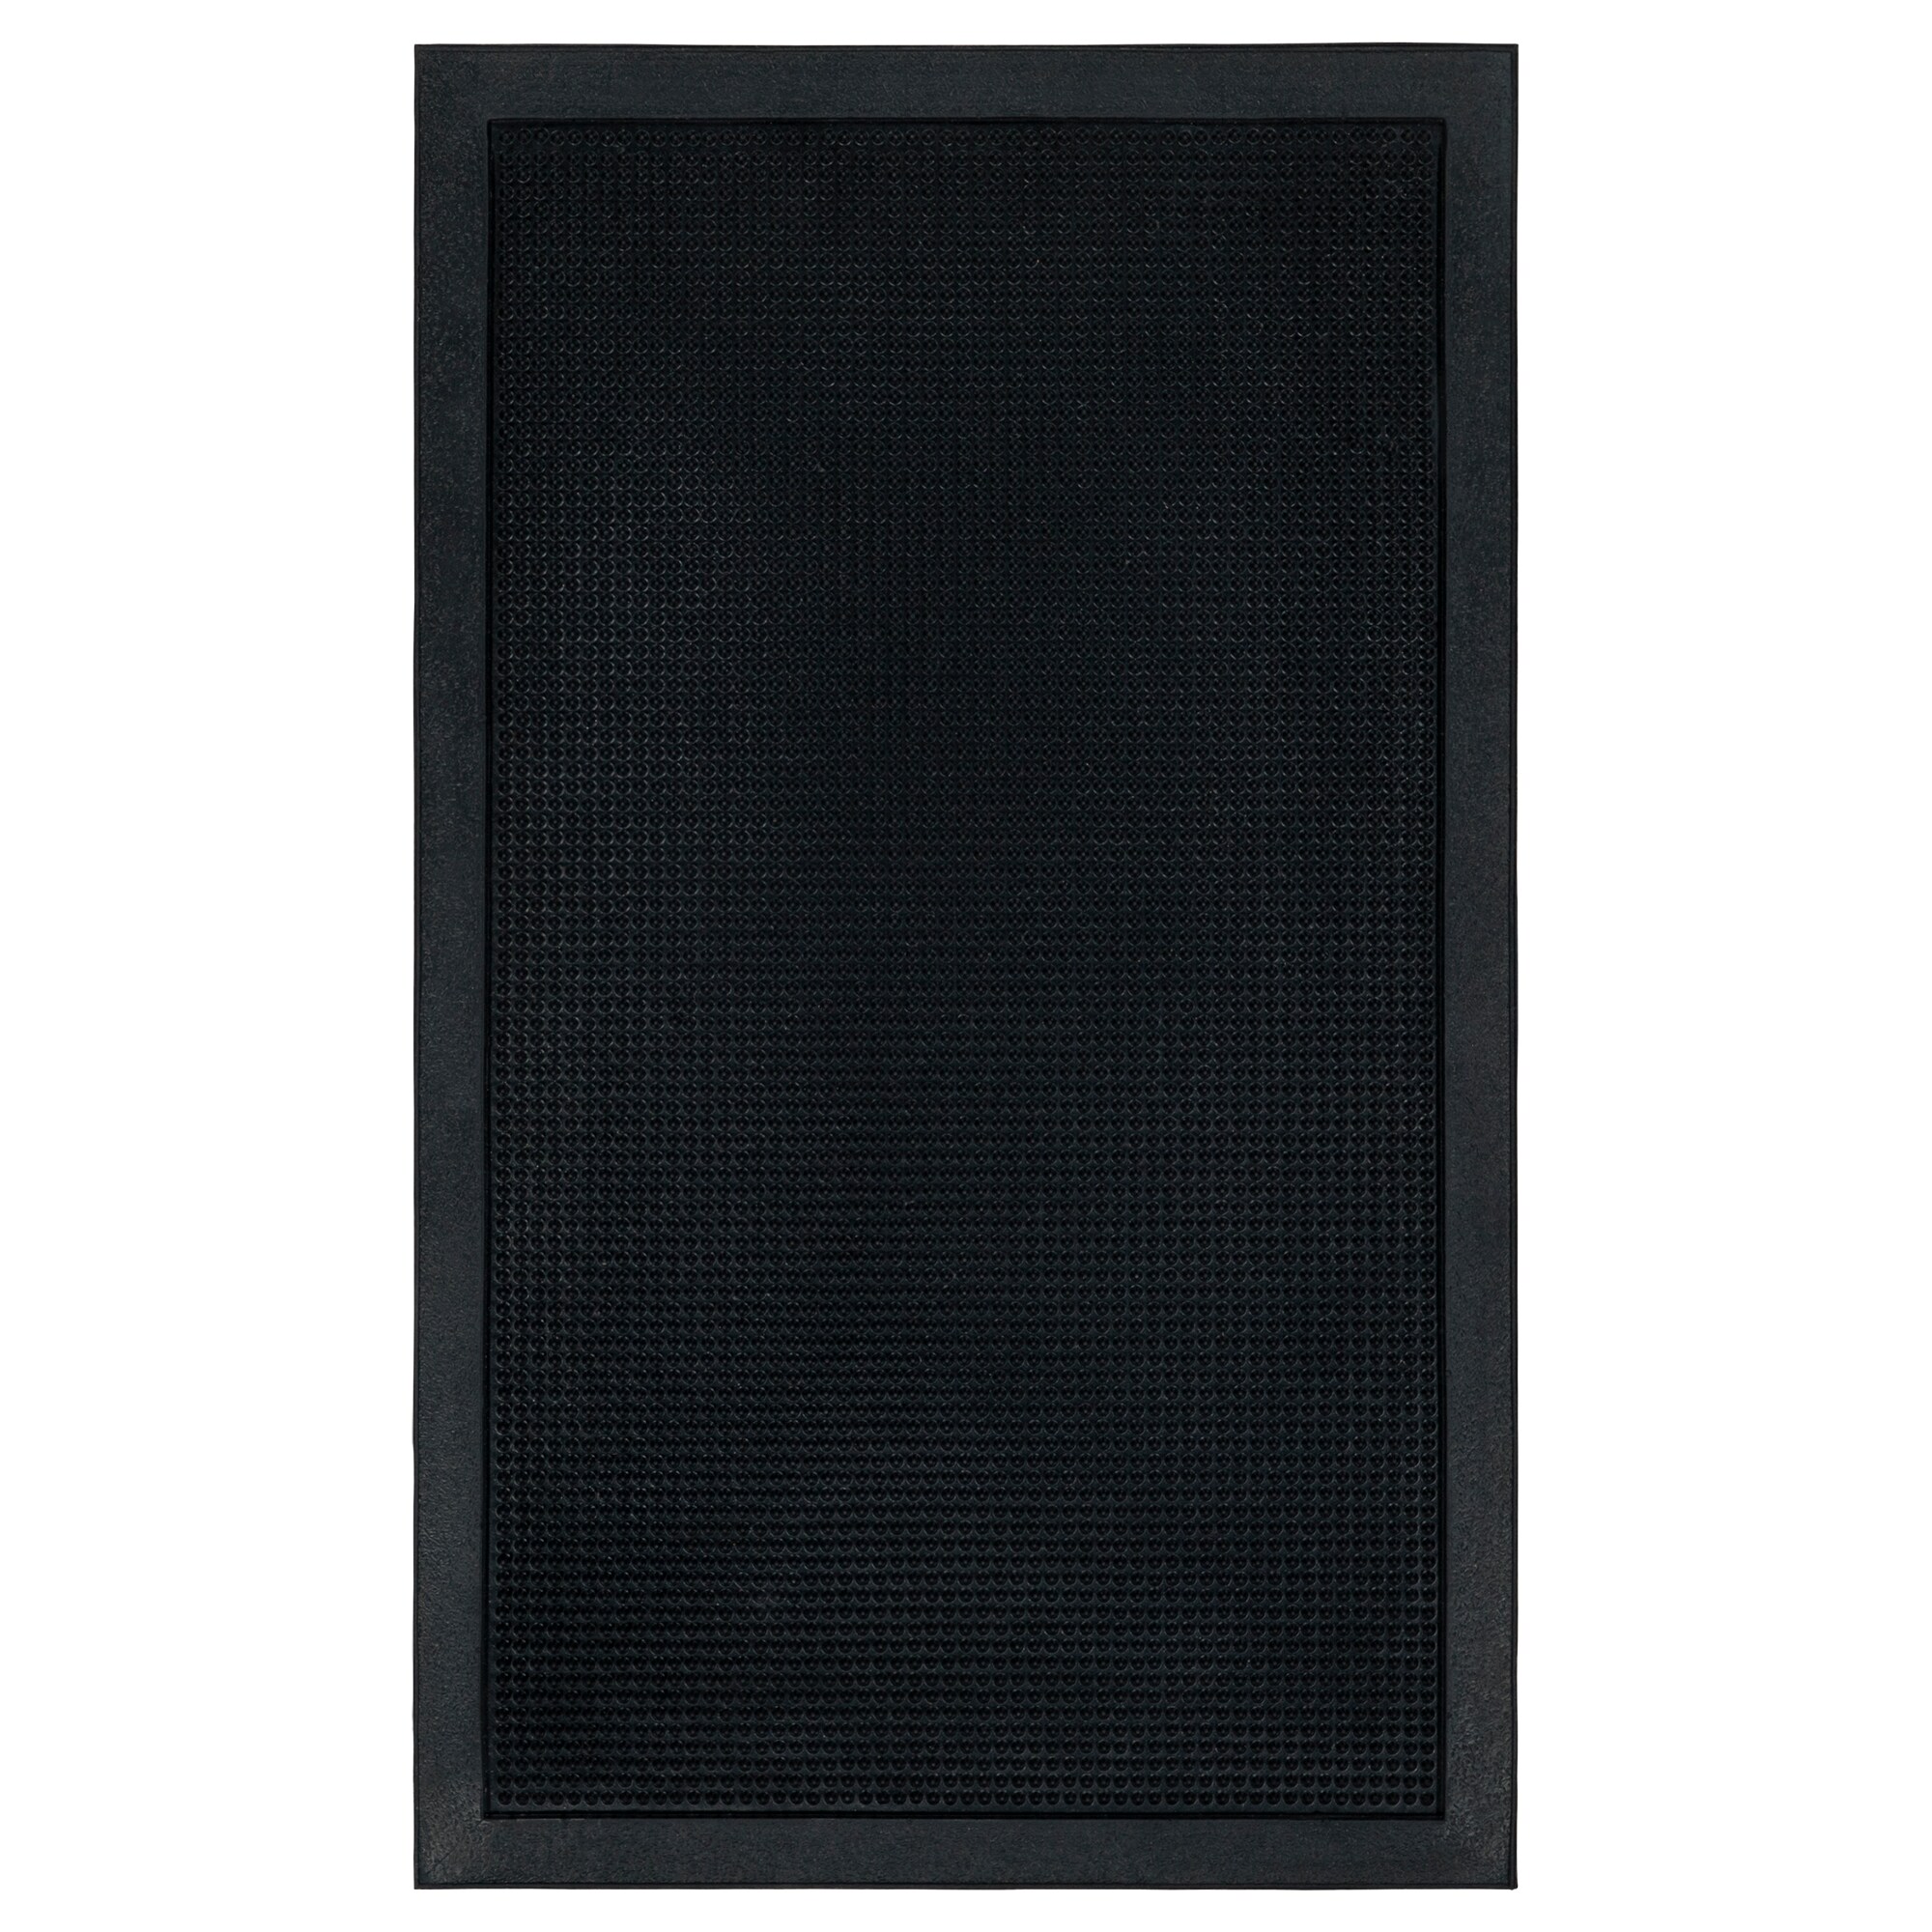 Ottomanson Rubber Doormat 3 ft. x 5 ft. Collection Area Rug, Black